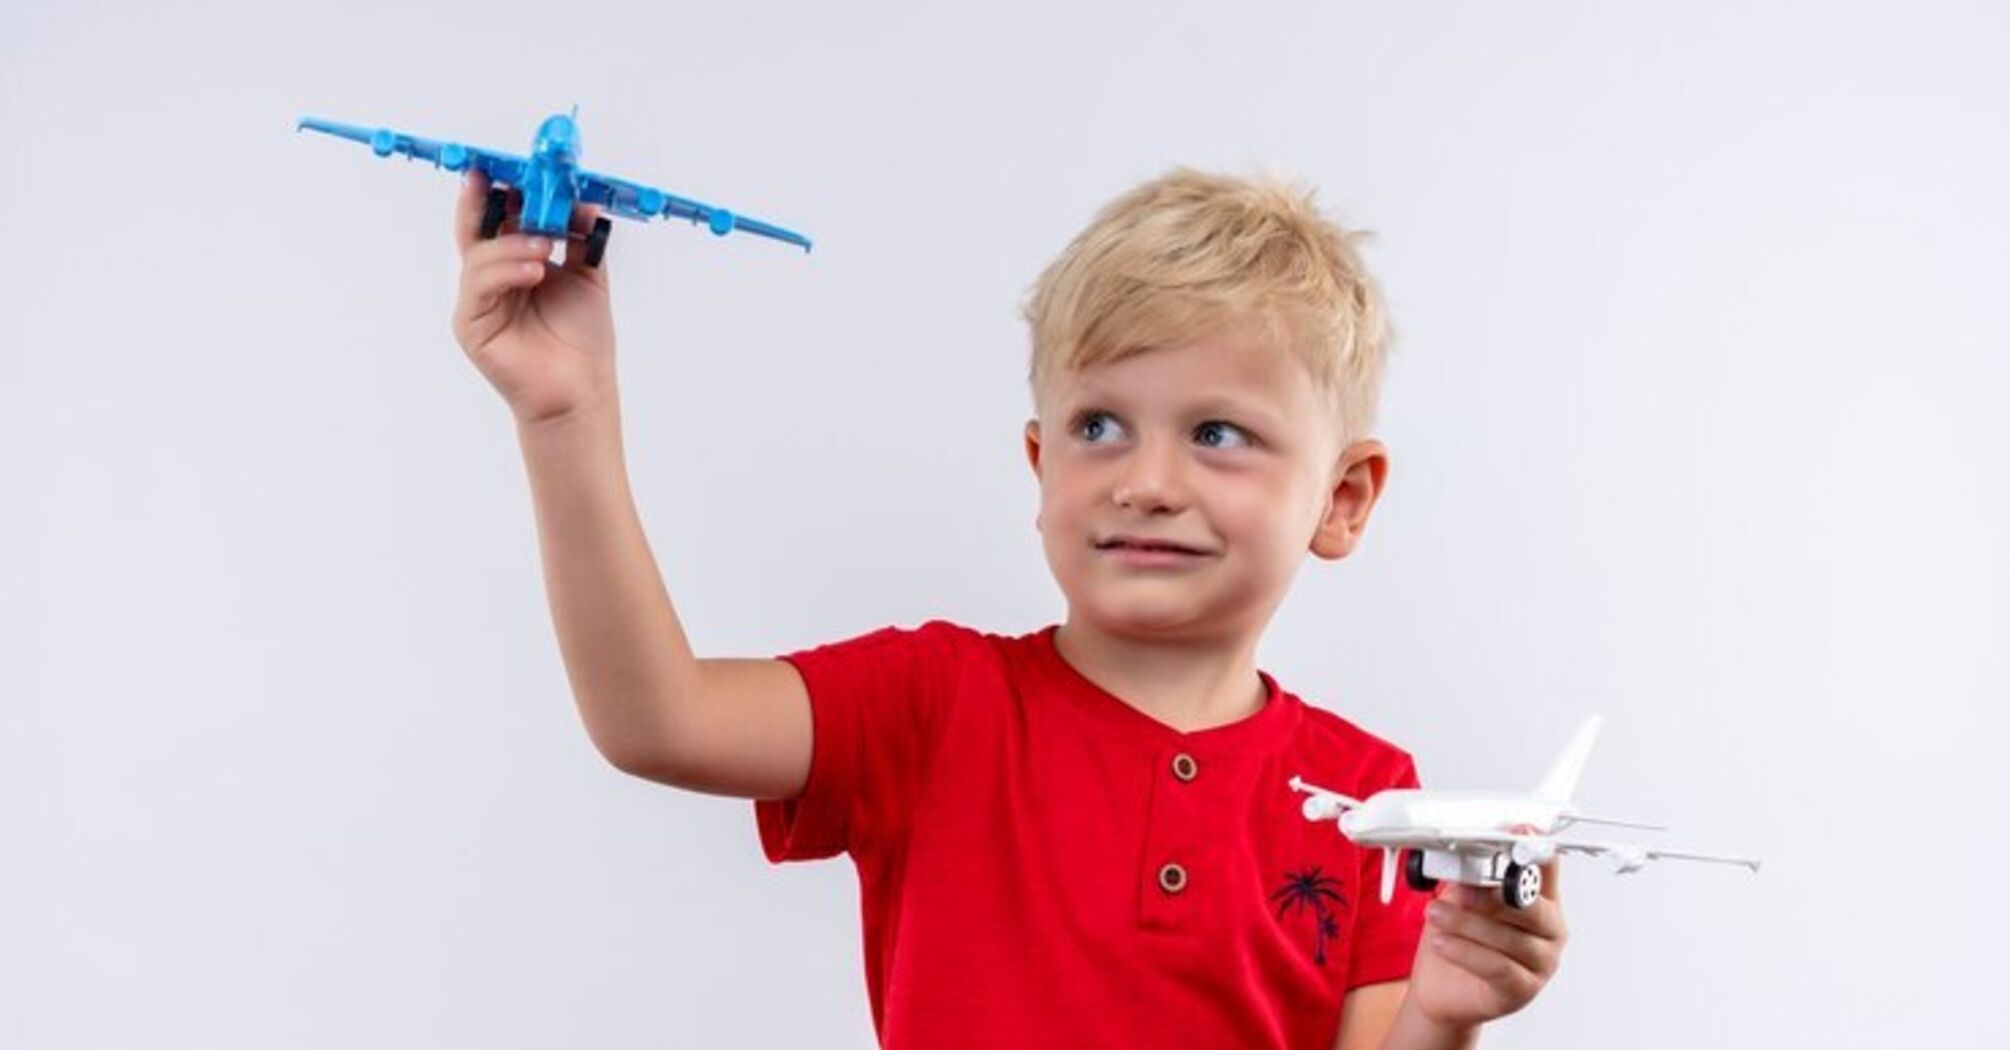 What you need to know about flying with small children